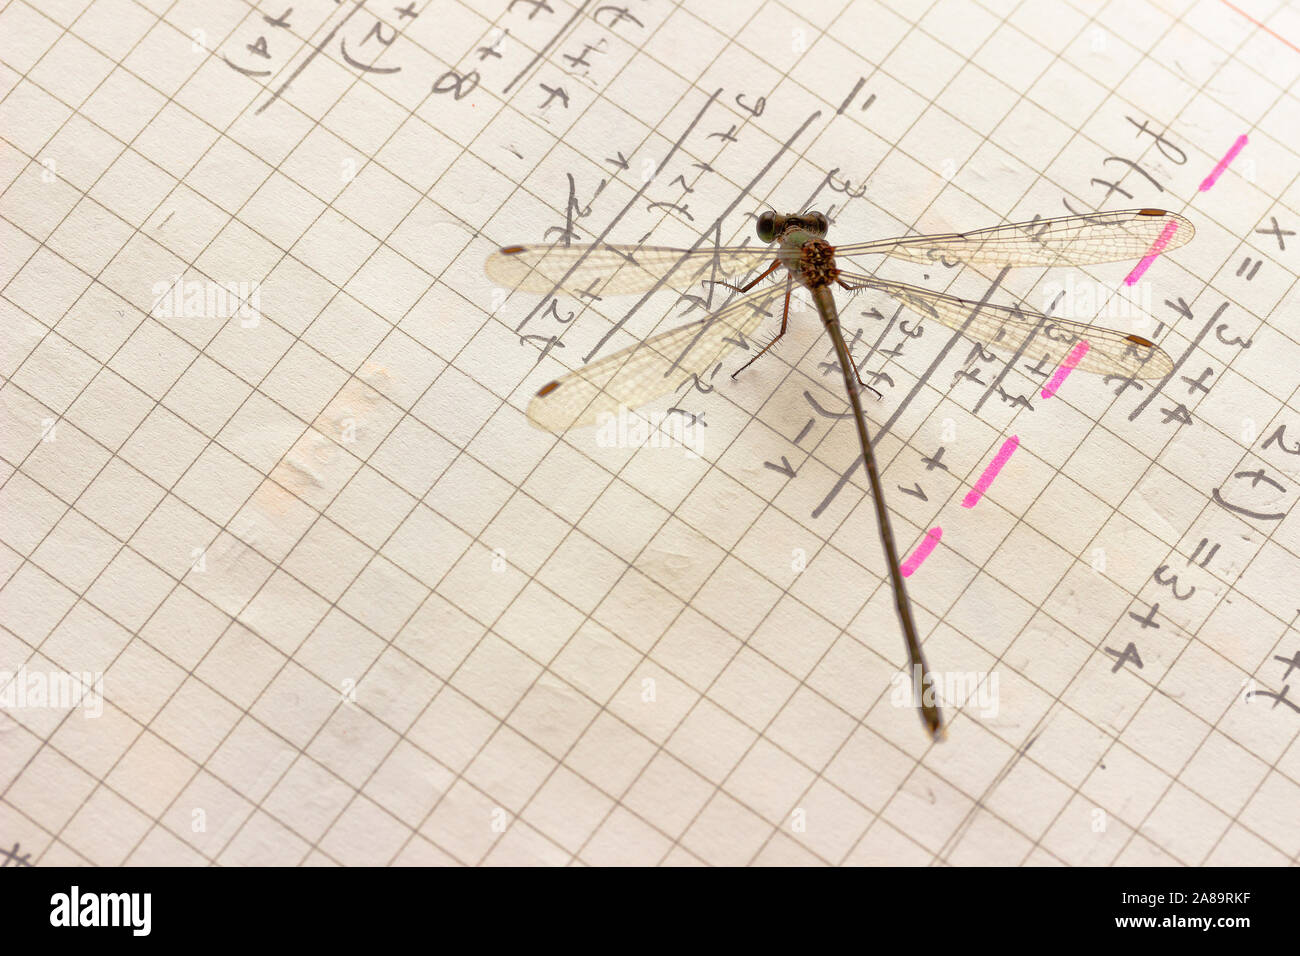 Damselfly rests on a maths note Stock Photo